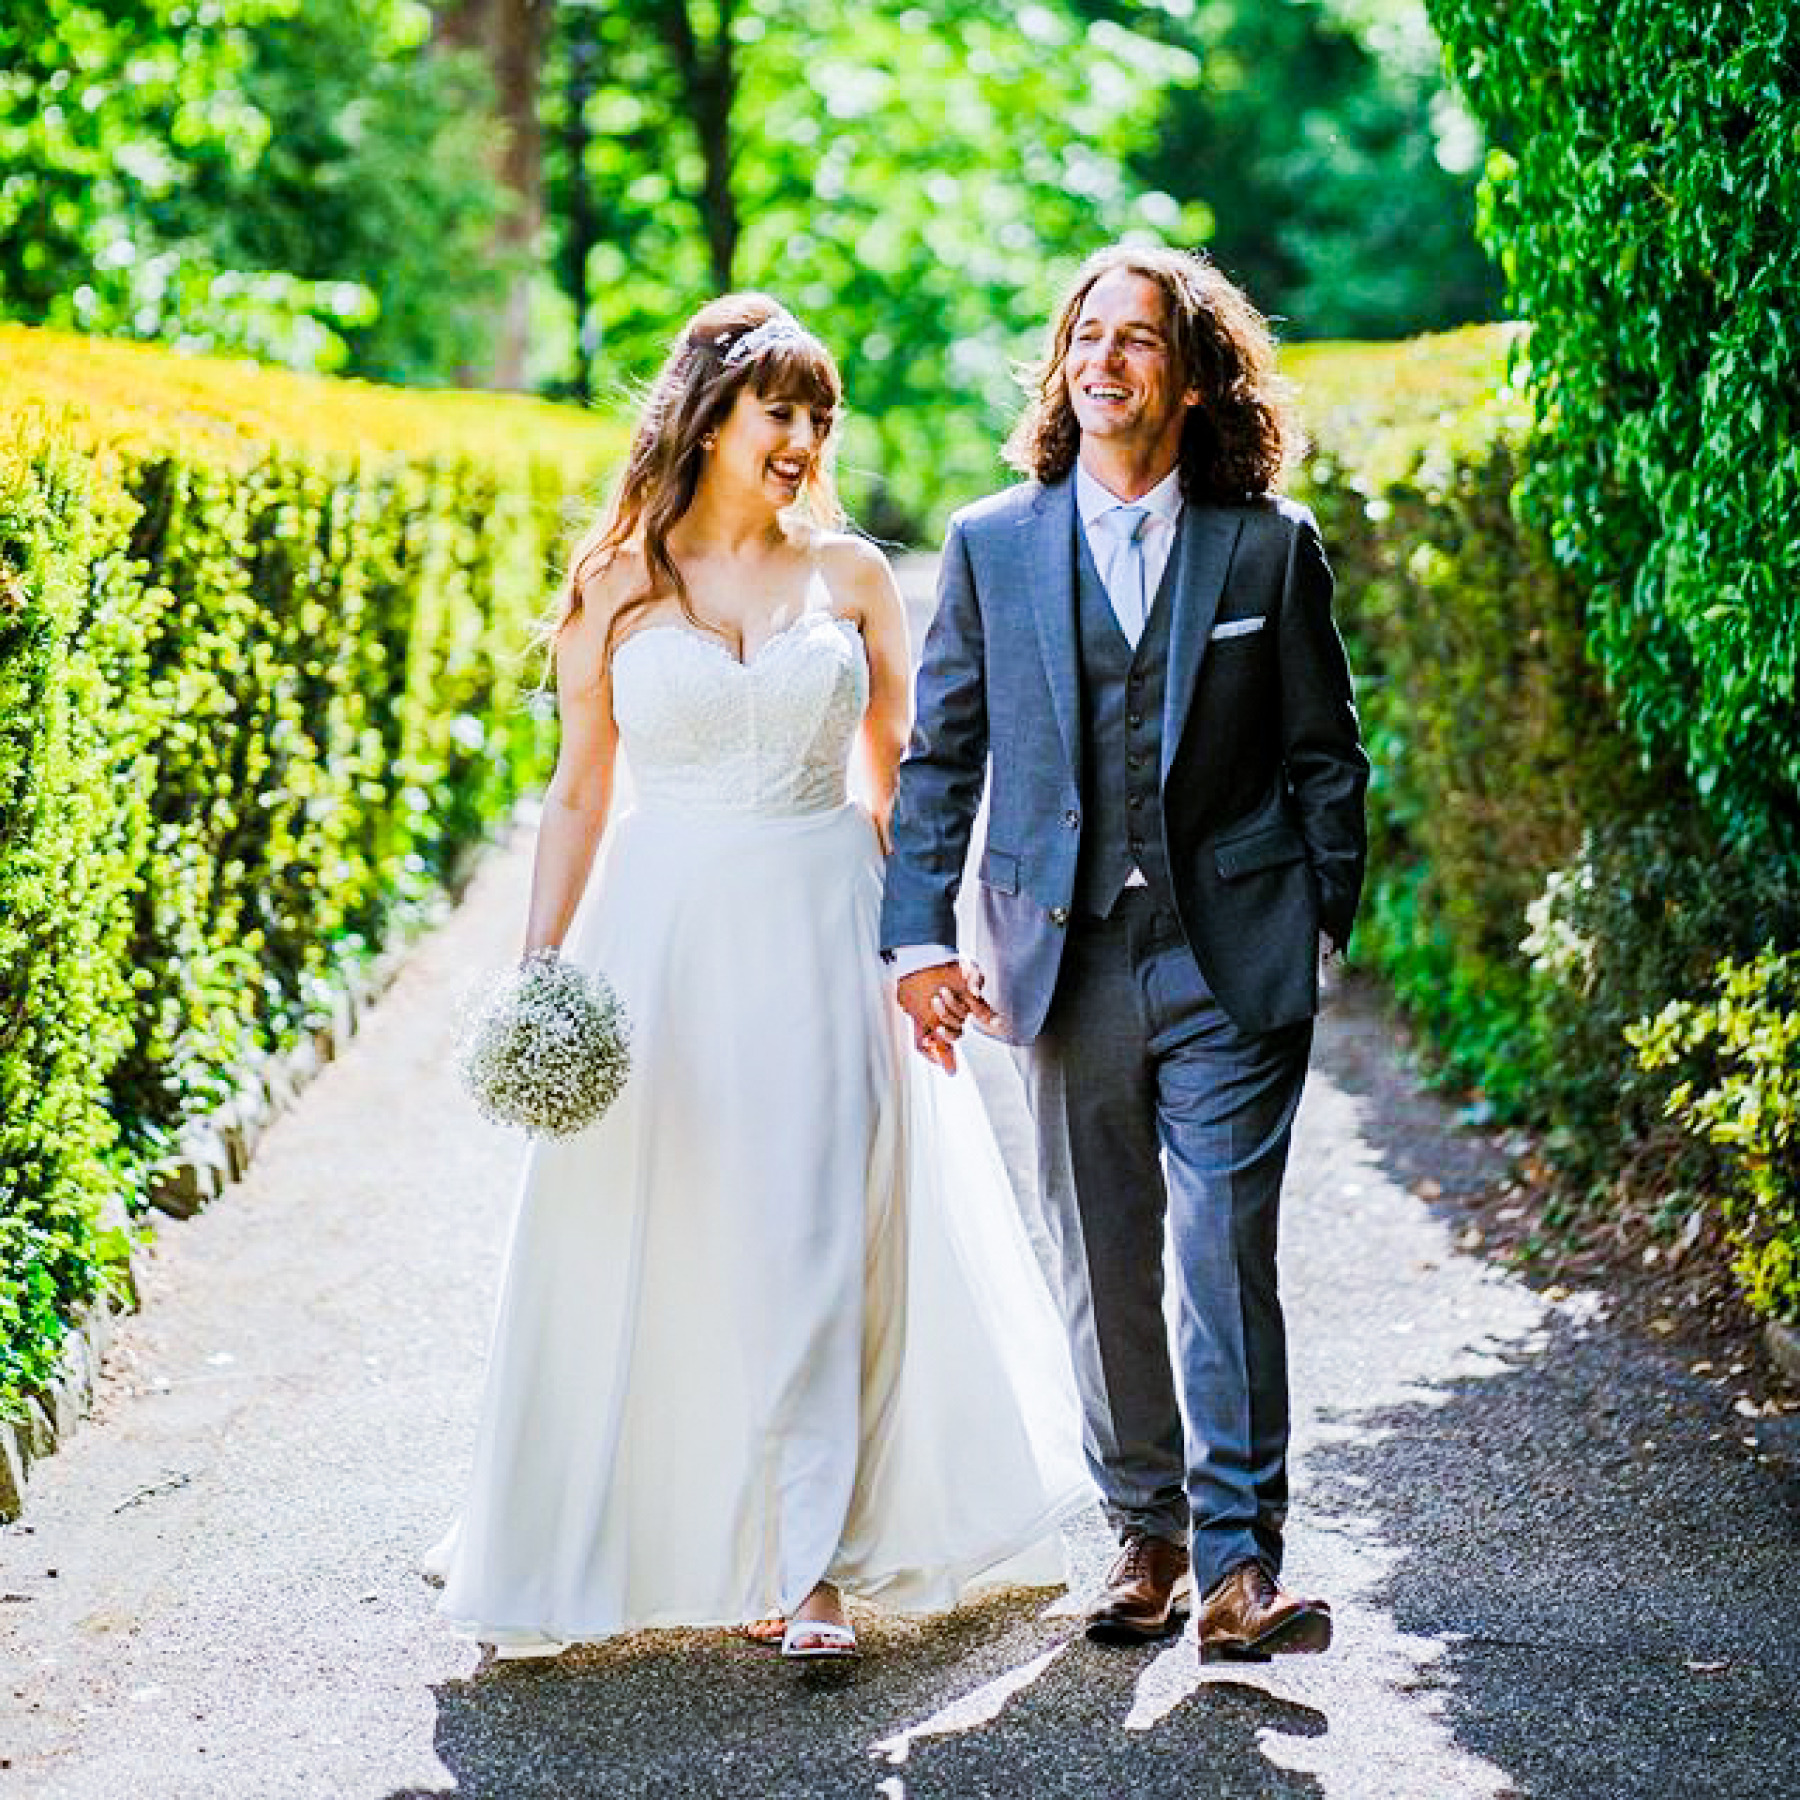 A bride and groom holding hands walking down the path towards the camera, flanked by hedges